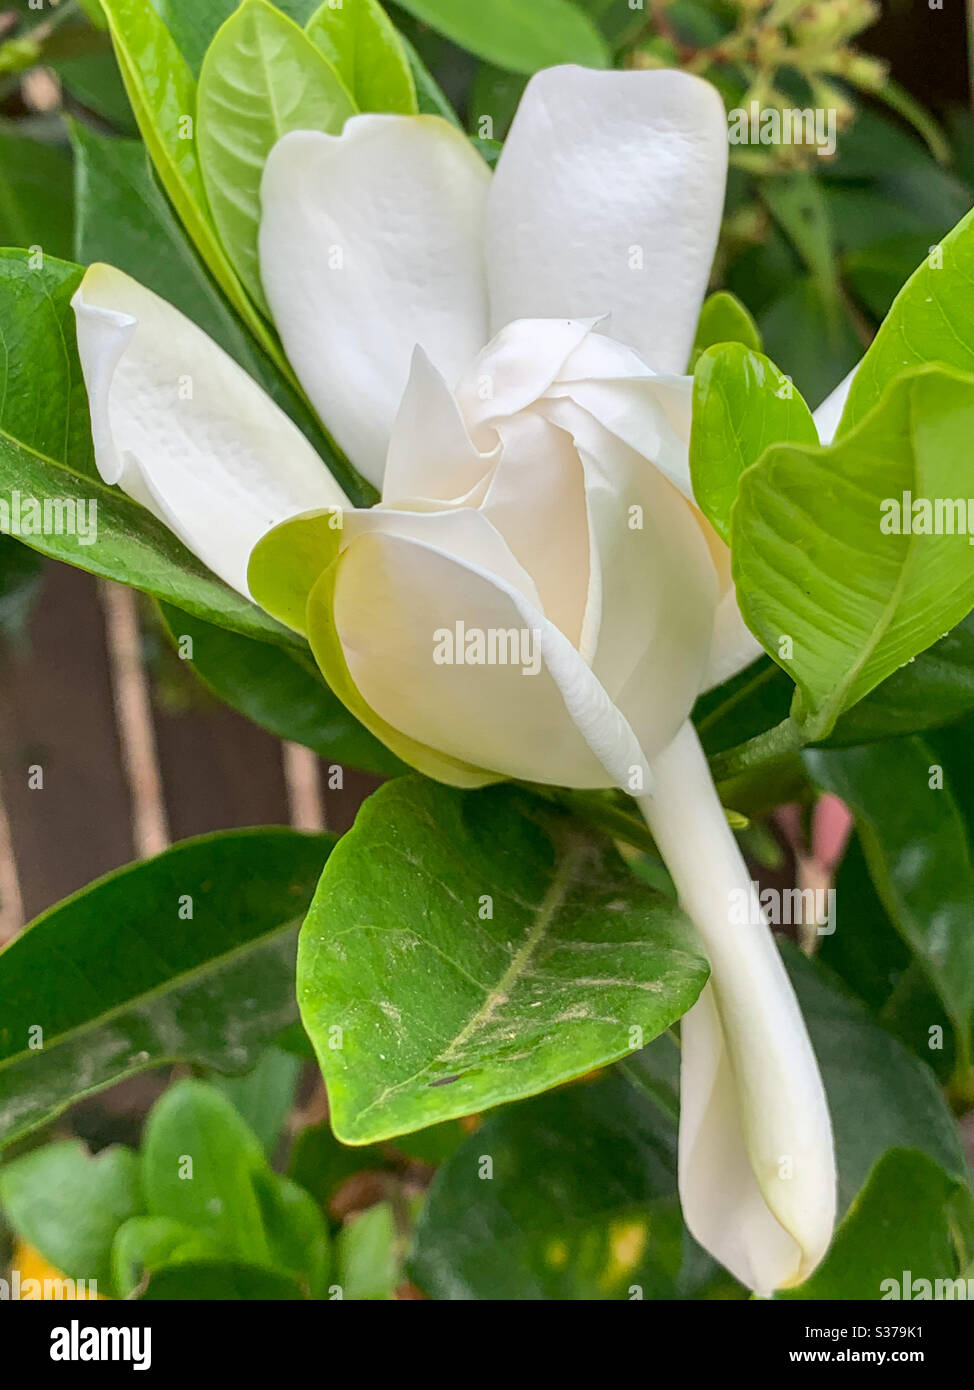 About to bloom, a Gardenia bud in a garden setting Stock Photo